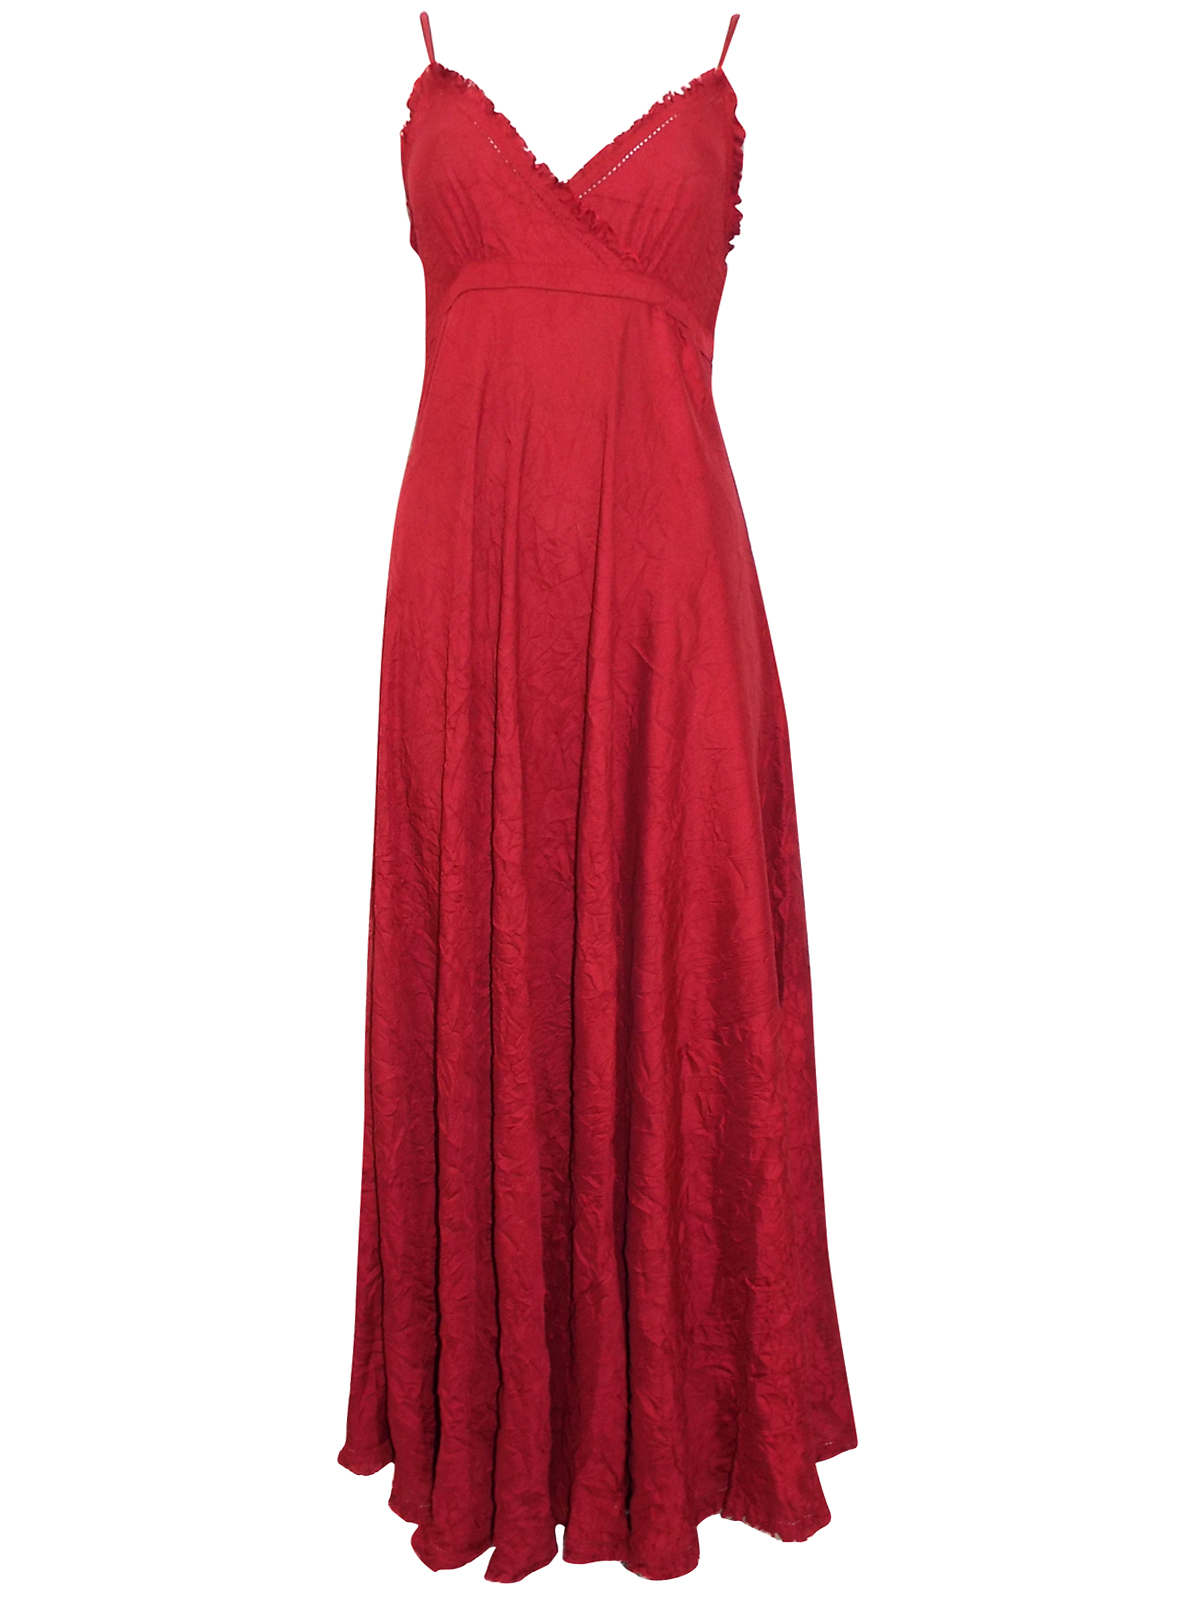 Milla - - Milla WINE Strappy Crushed Crinkle Maxi Dress - Size 10 to 22 ...